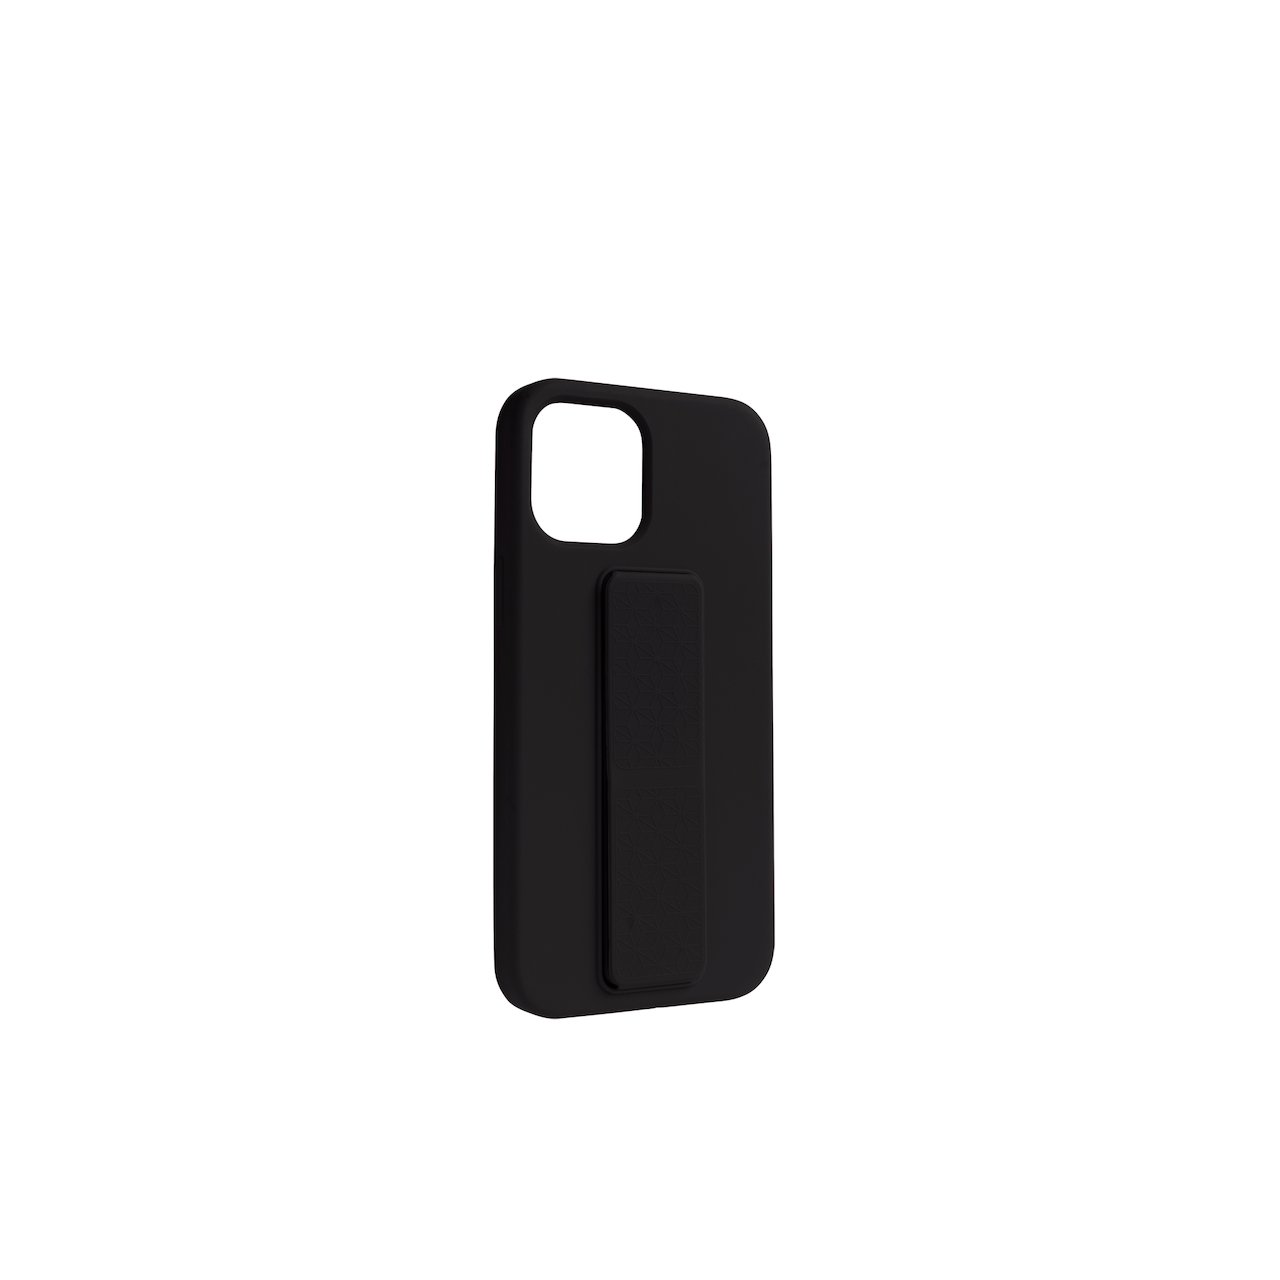 LEKI BYCPH COVER TIL IPHONE 14 PRO GRIP AND STAND SILIKON SORT